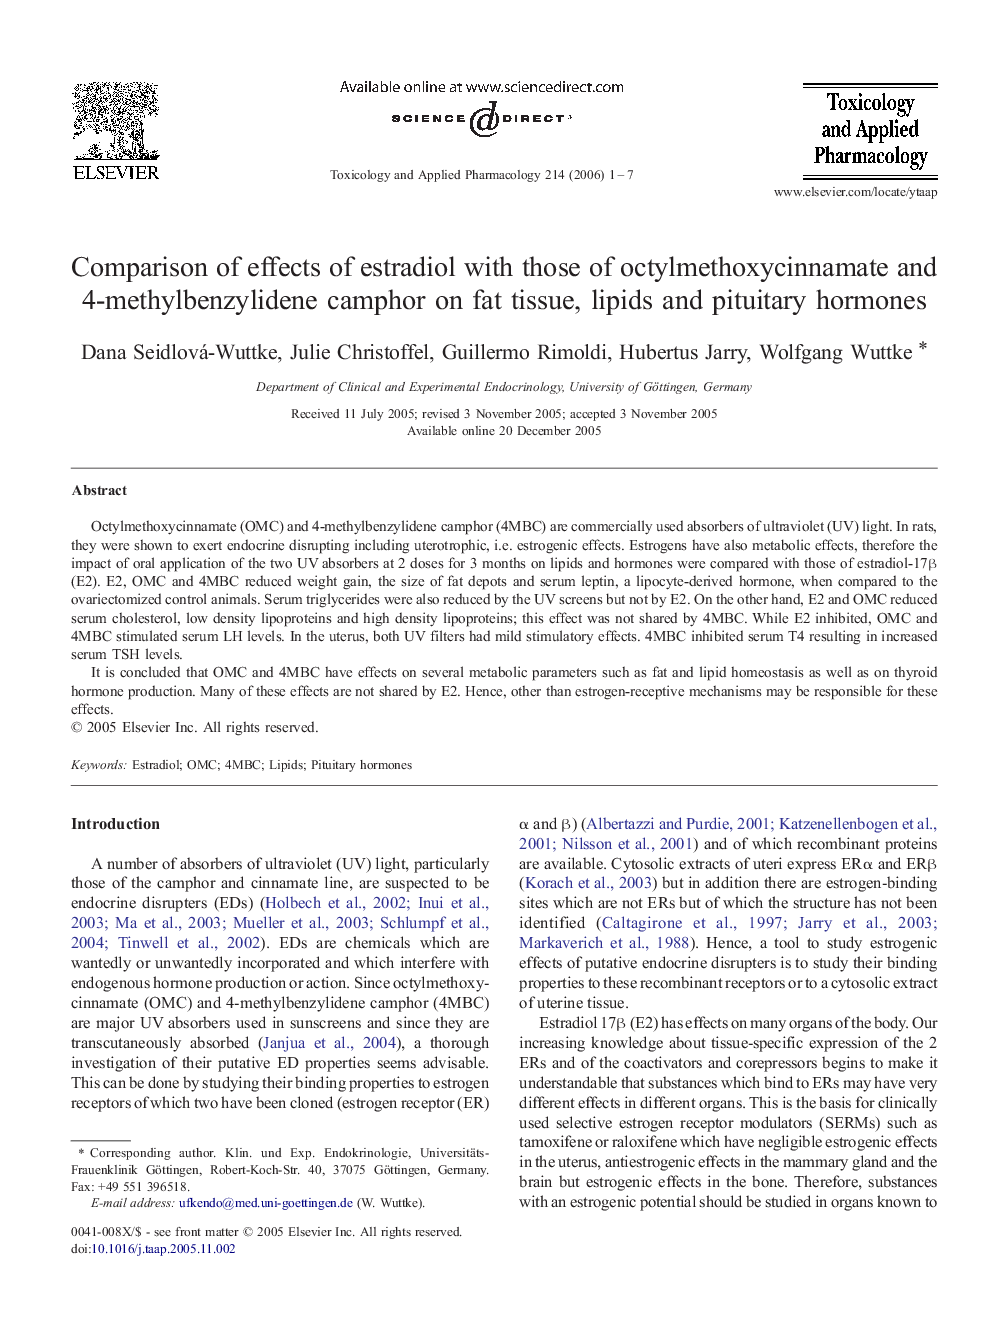 Comparison of effects of estradiol with those of octylmethoxycinnamate and 4-methylbenzylidene camphor on fat tissue, lipids and pituitary hormones